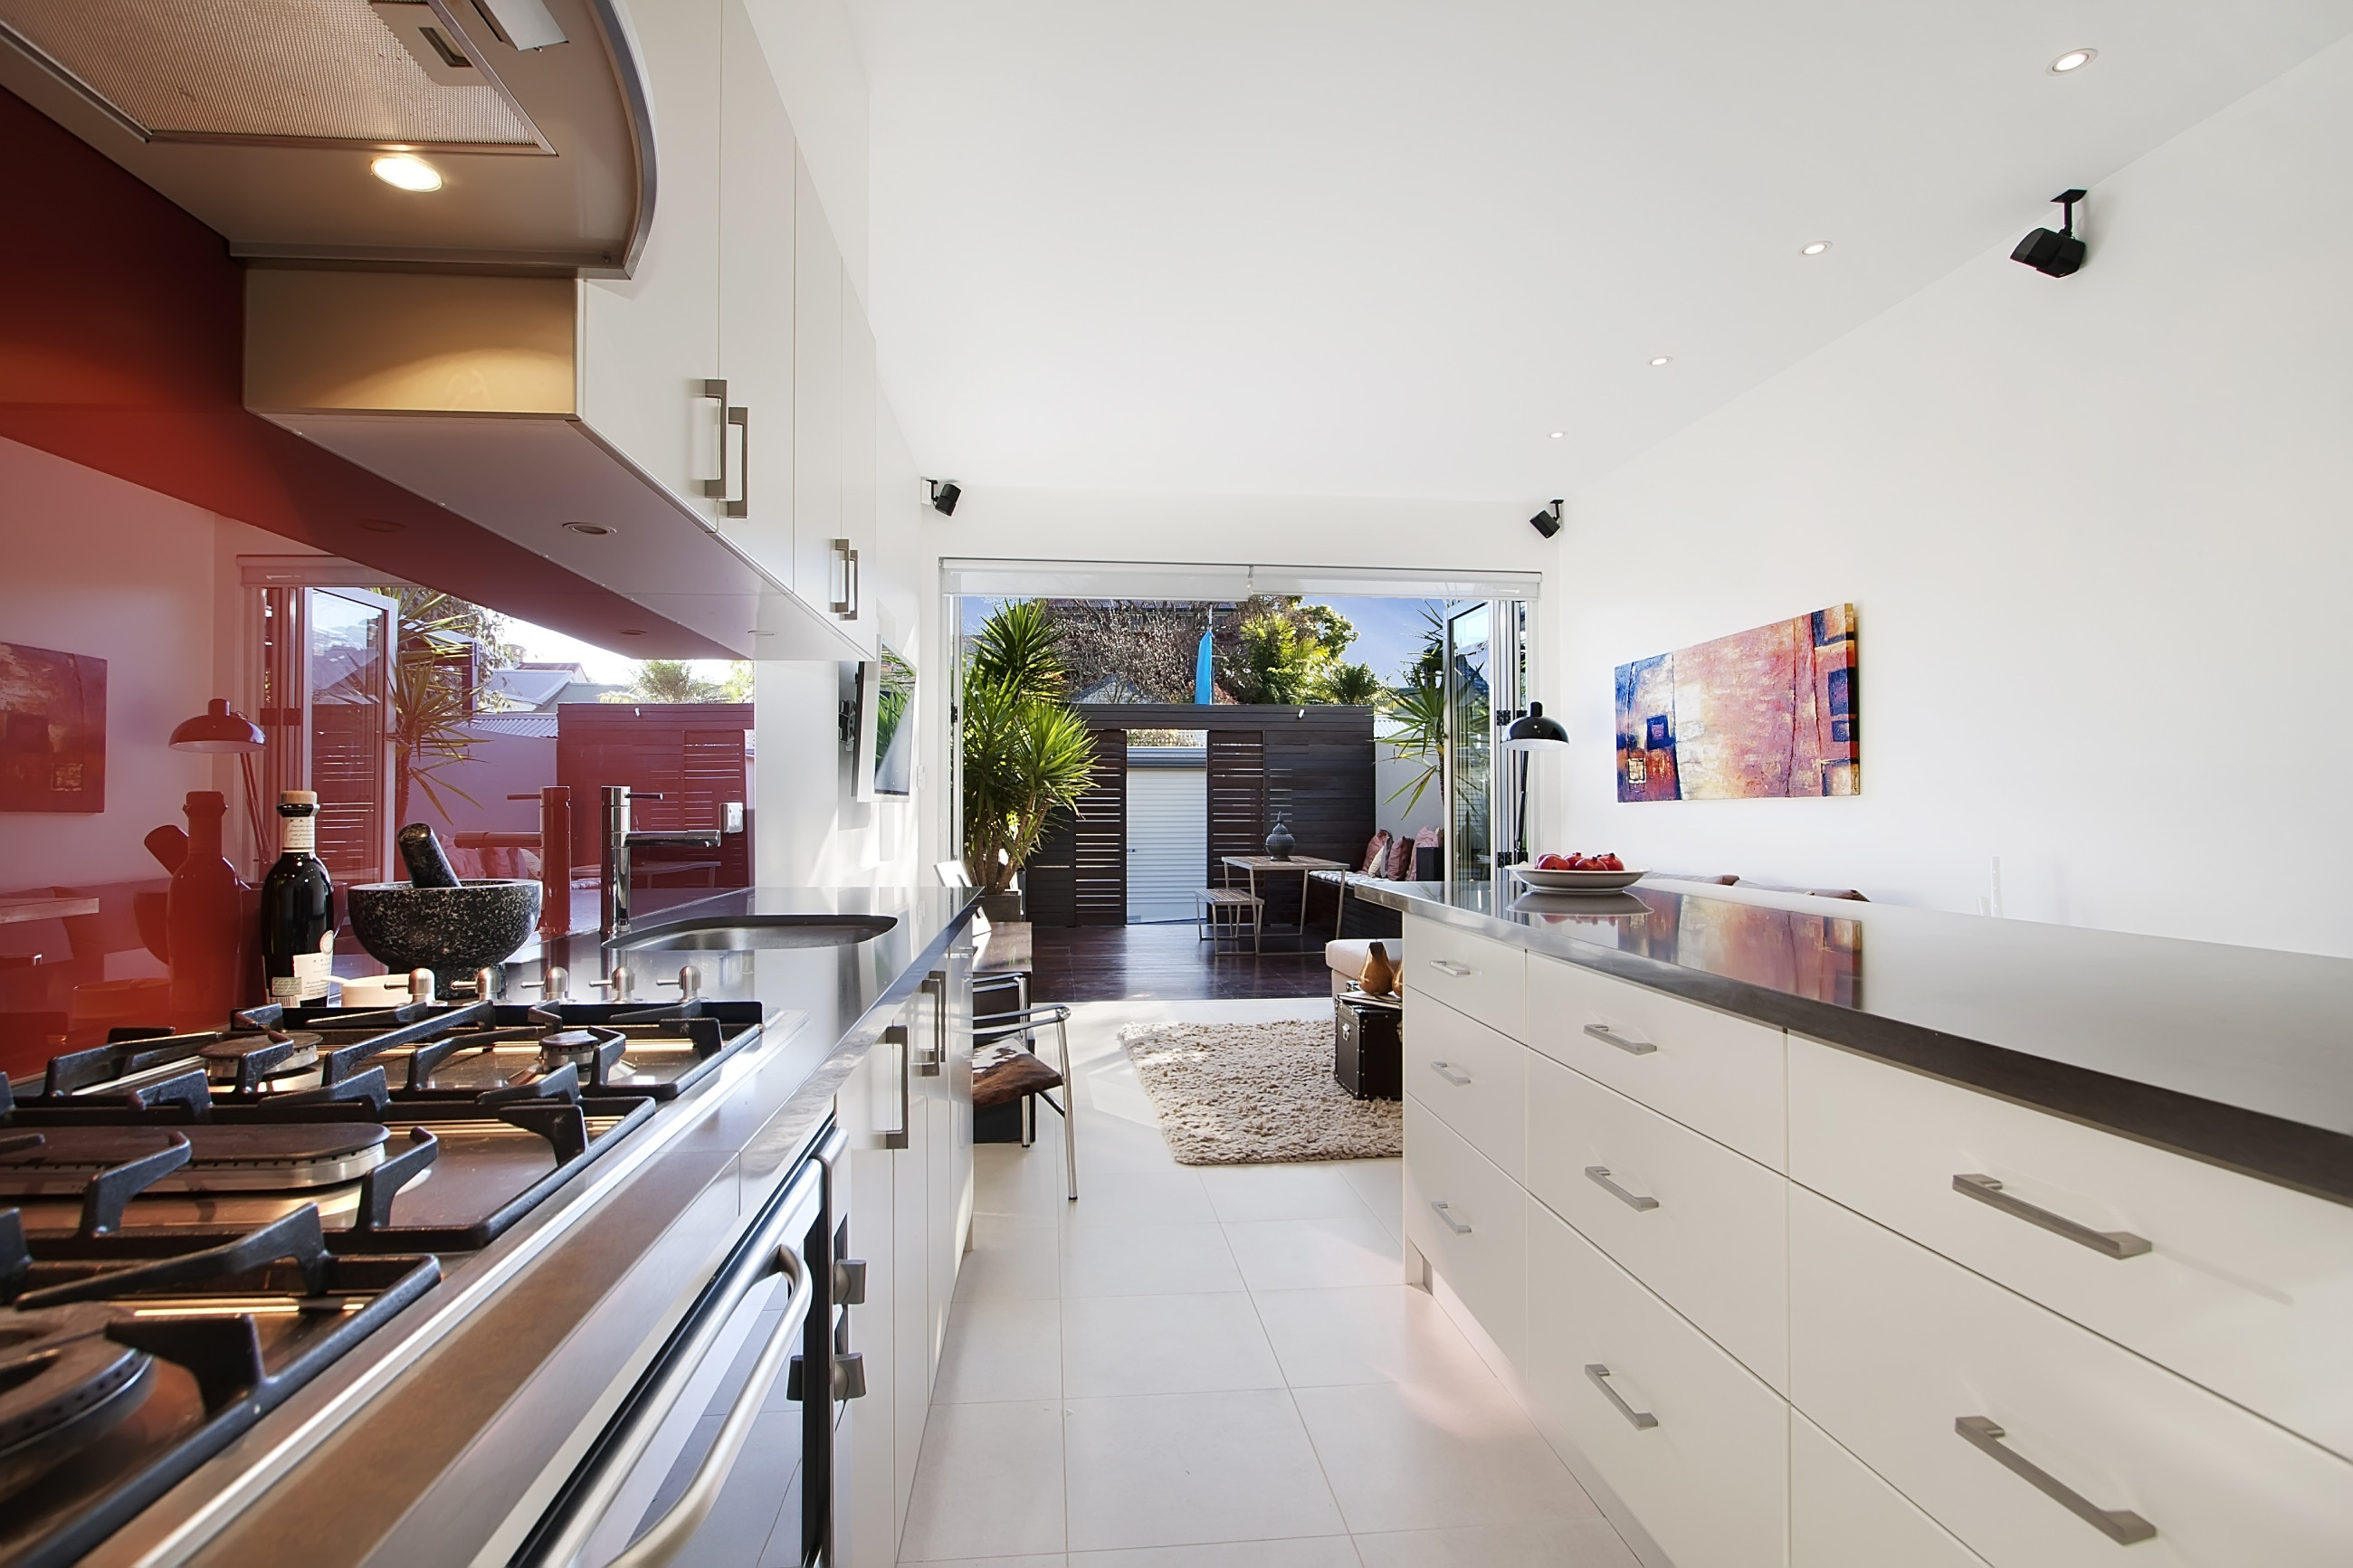 White kitchen with red splash back, featuring outdoor timber fencing